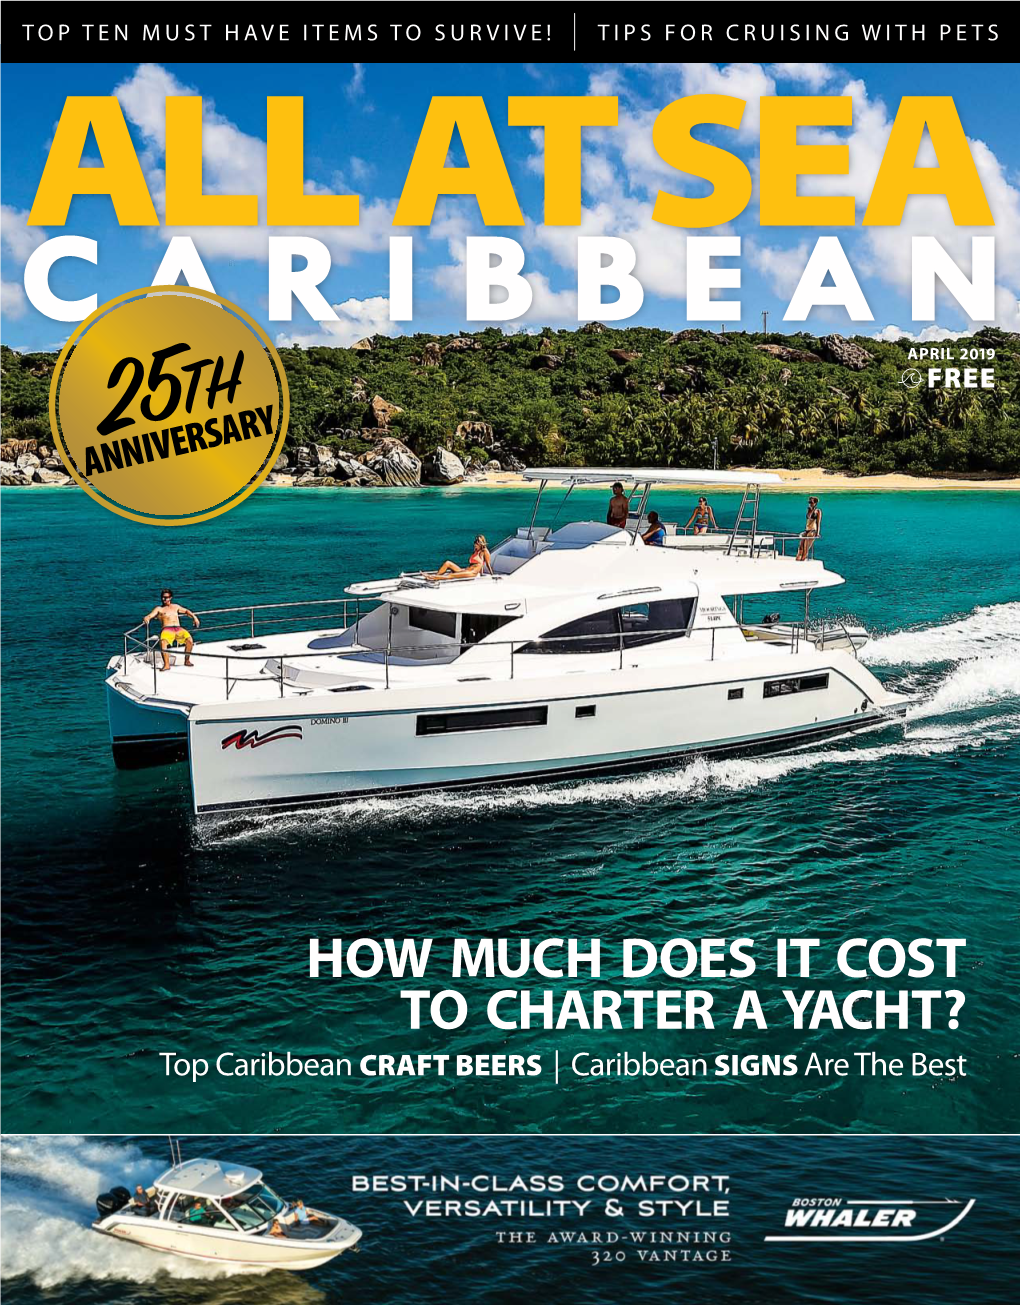 How Much Does It Cost to Charter a Yacht? Top Caribbean Craft Beers | C Aribbean Signs a Re the Best CARIBBEAN NEWS